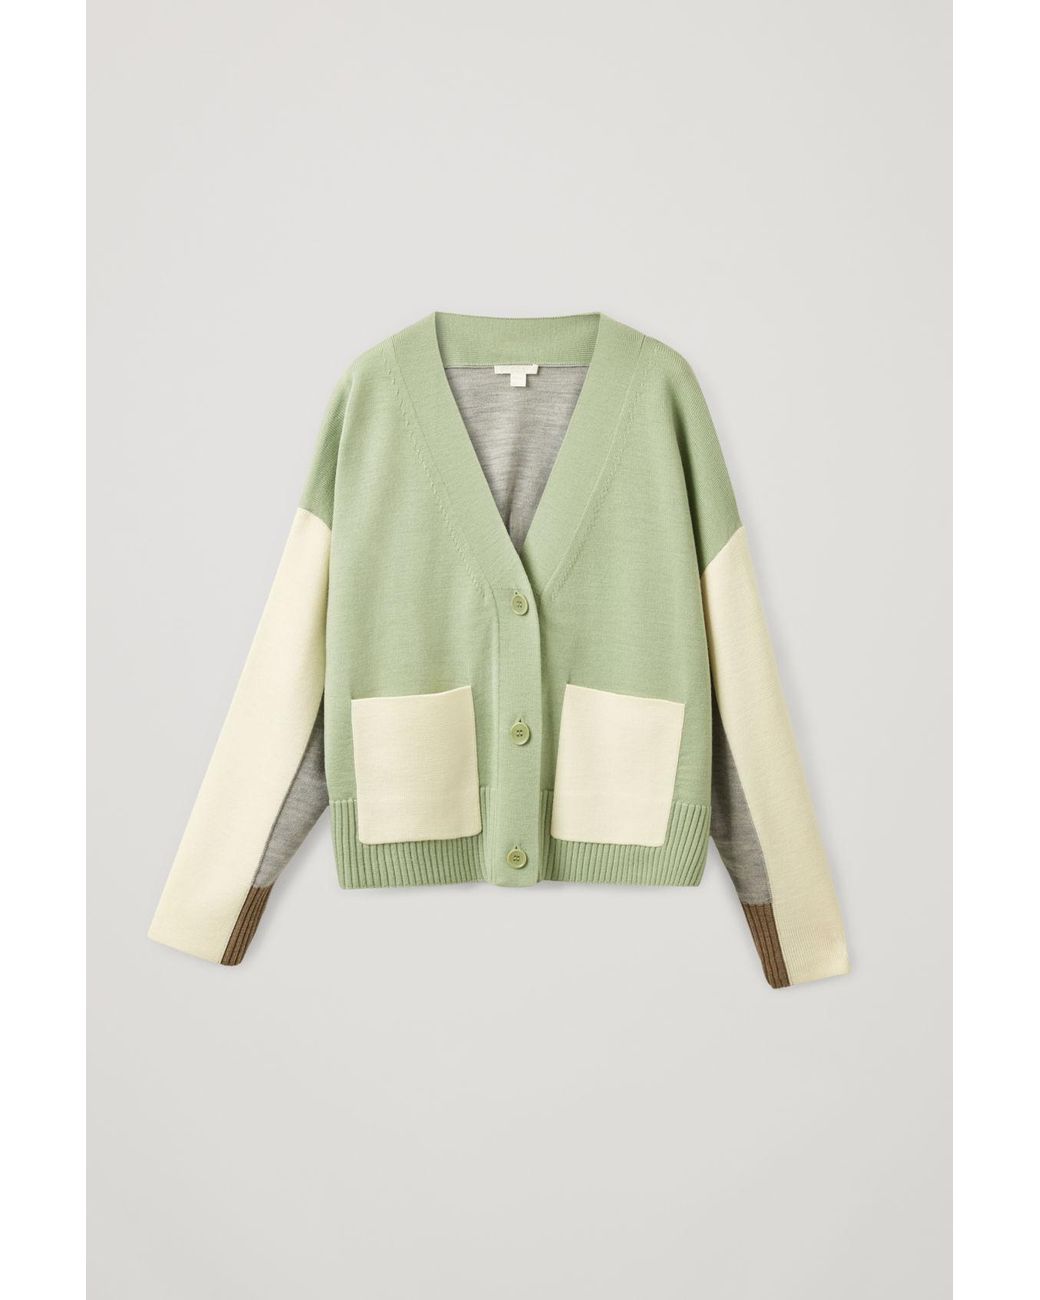 COS Colour-block Cardigan in Green | Lyst